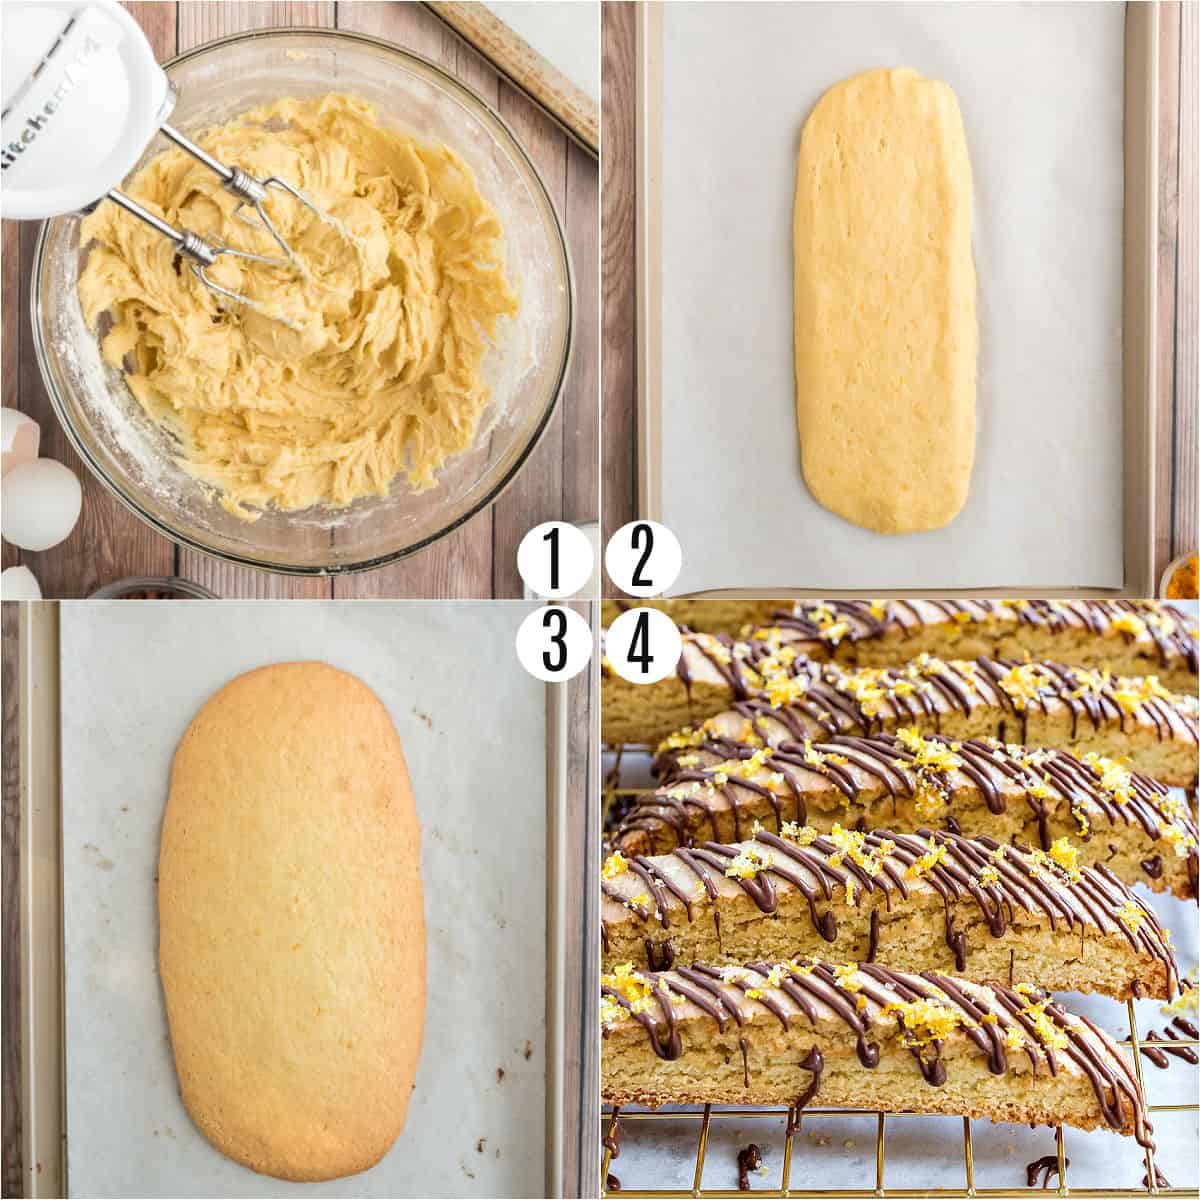 Step by step photos showing how to make orange biscotti drizzled with chocolate.